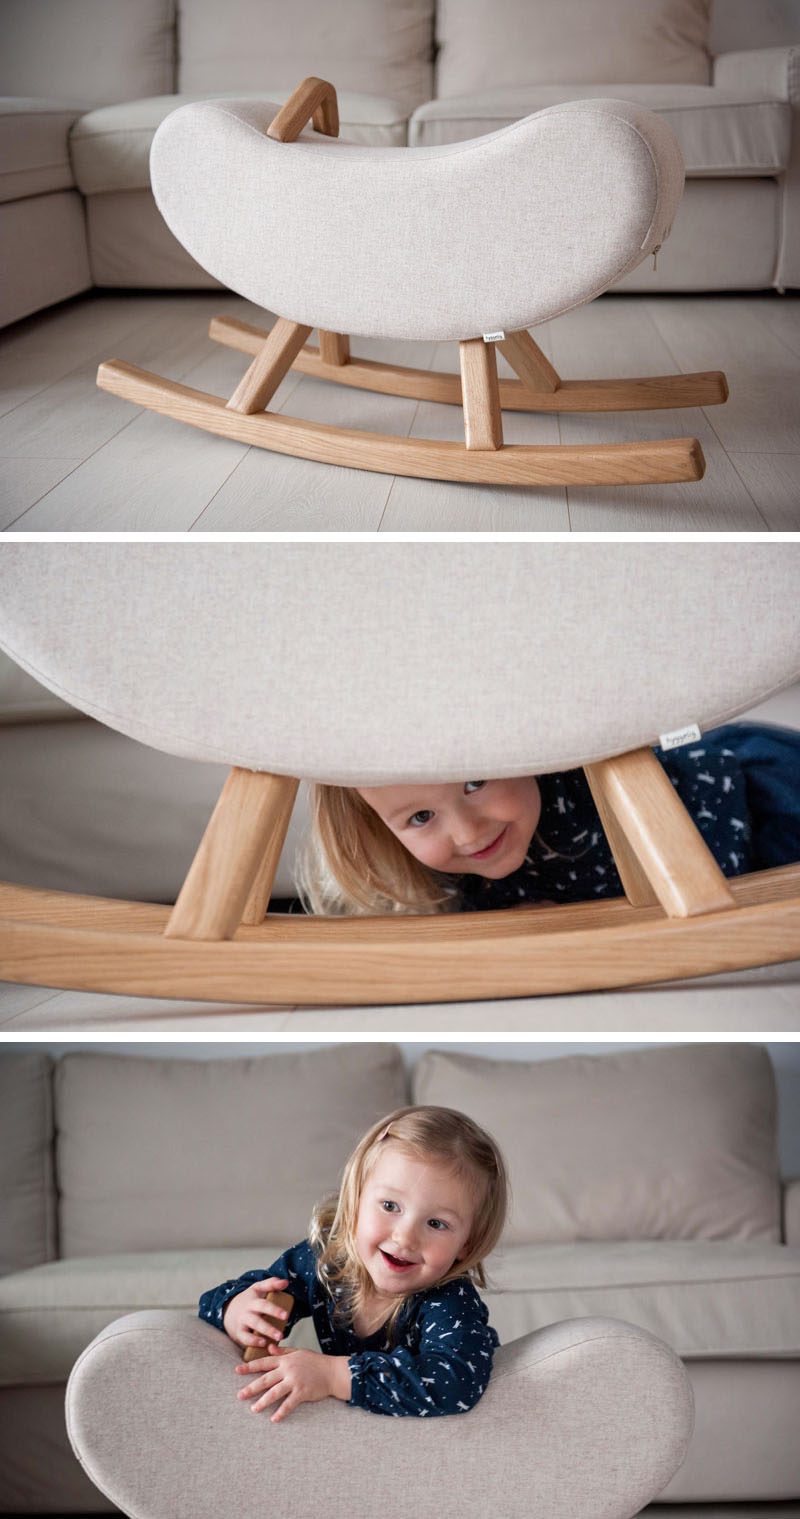 Hyggelig have designed a pair of children's rockers named 'The Mountain' and 'The Banana', that were inspired by the items that they're named after. #ModernKidsFurniture #ChildrensFurniture #ModernToys